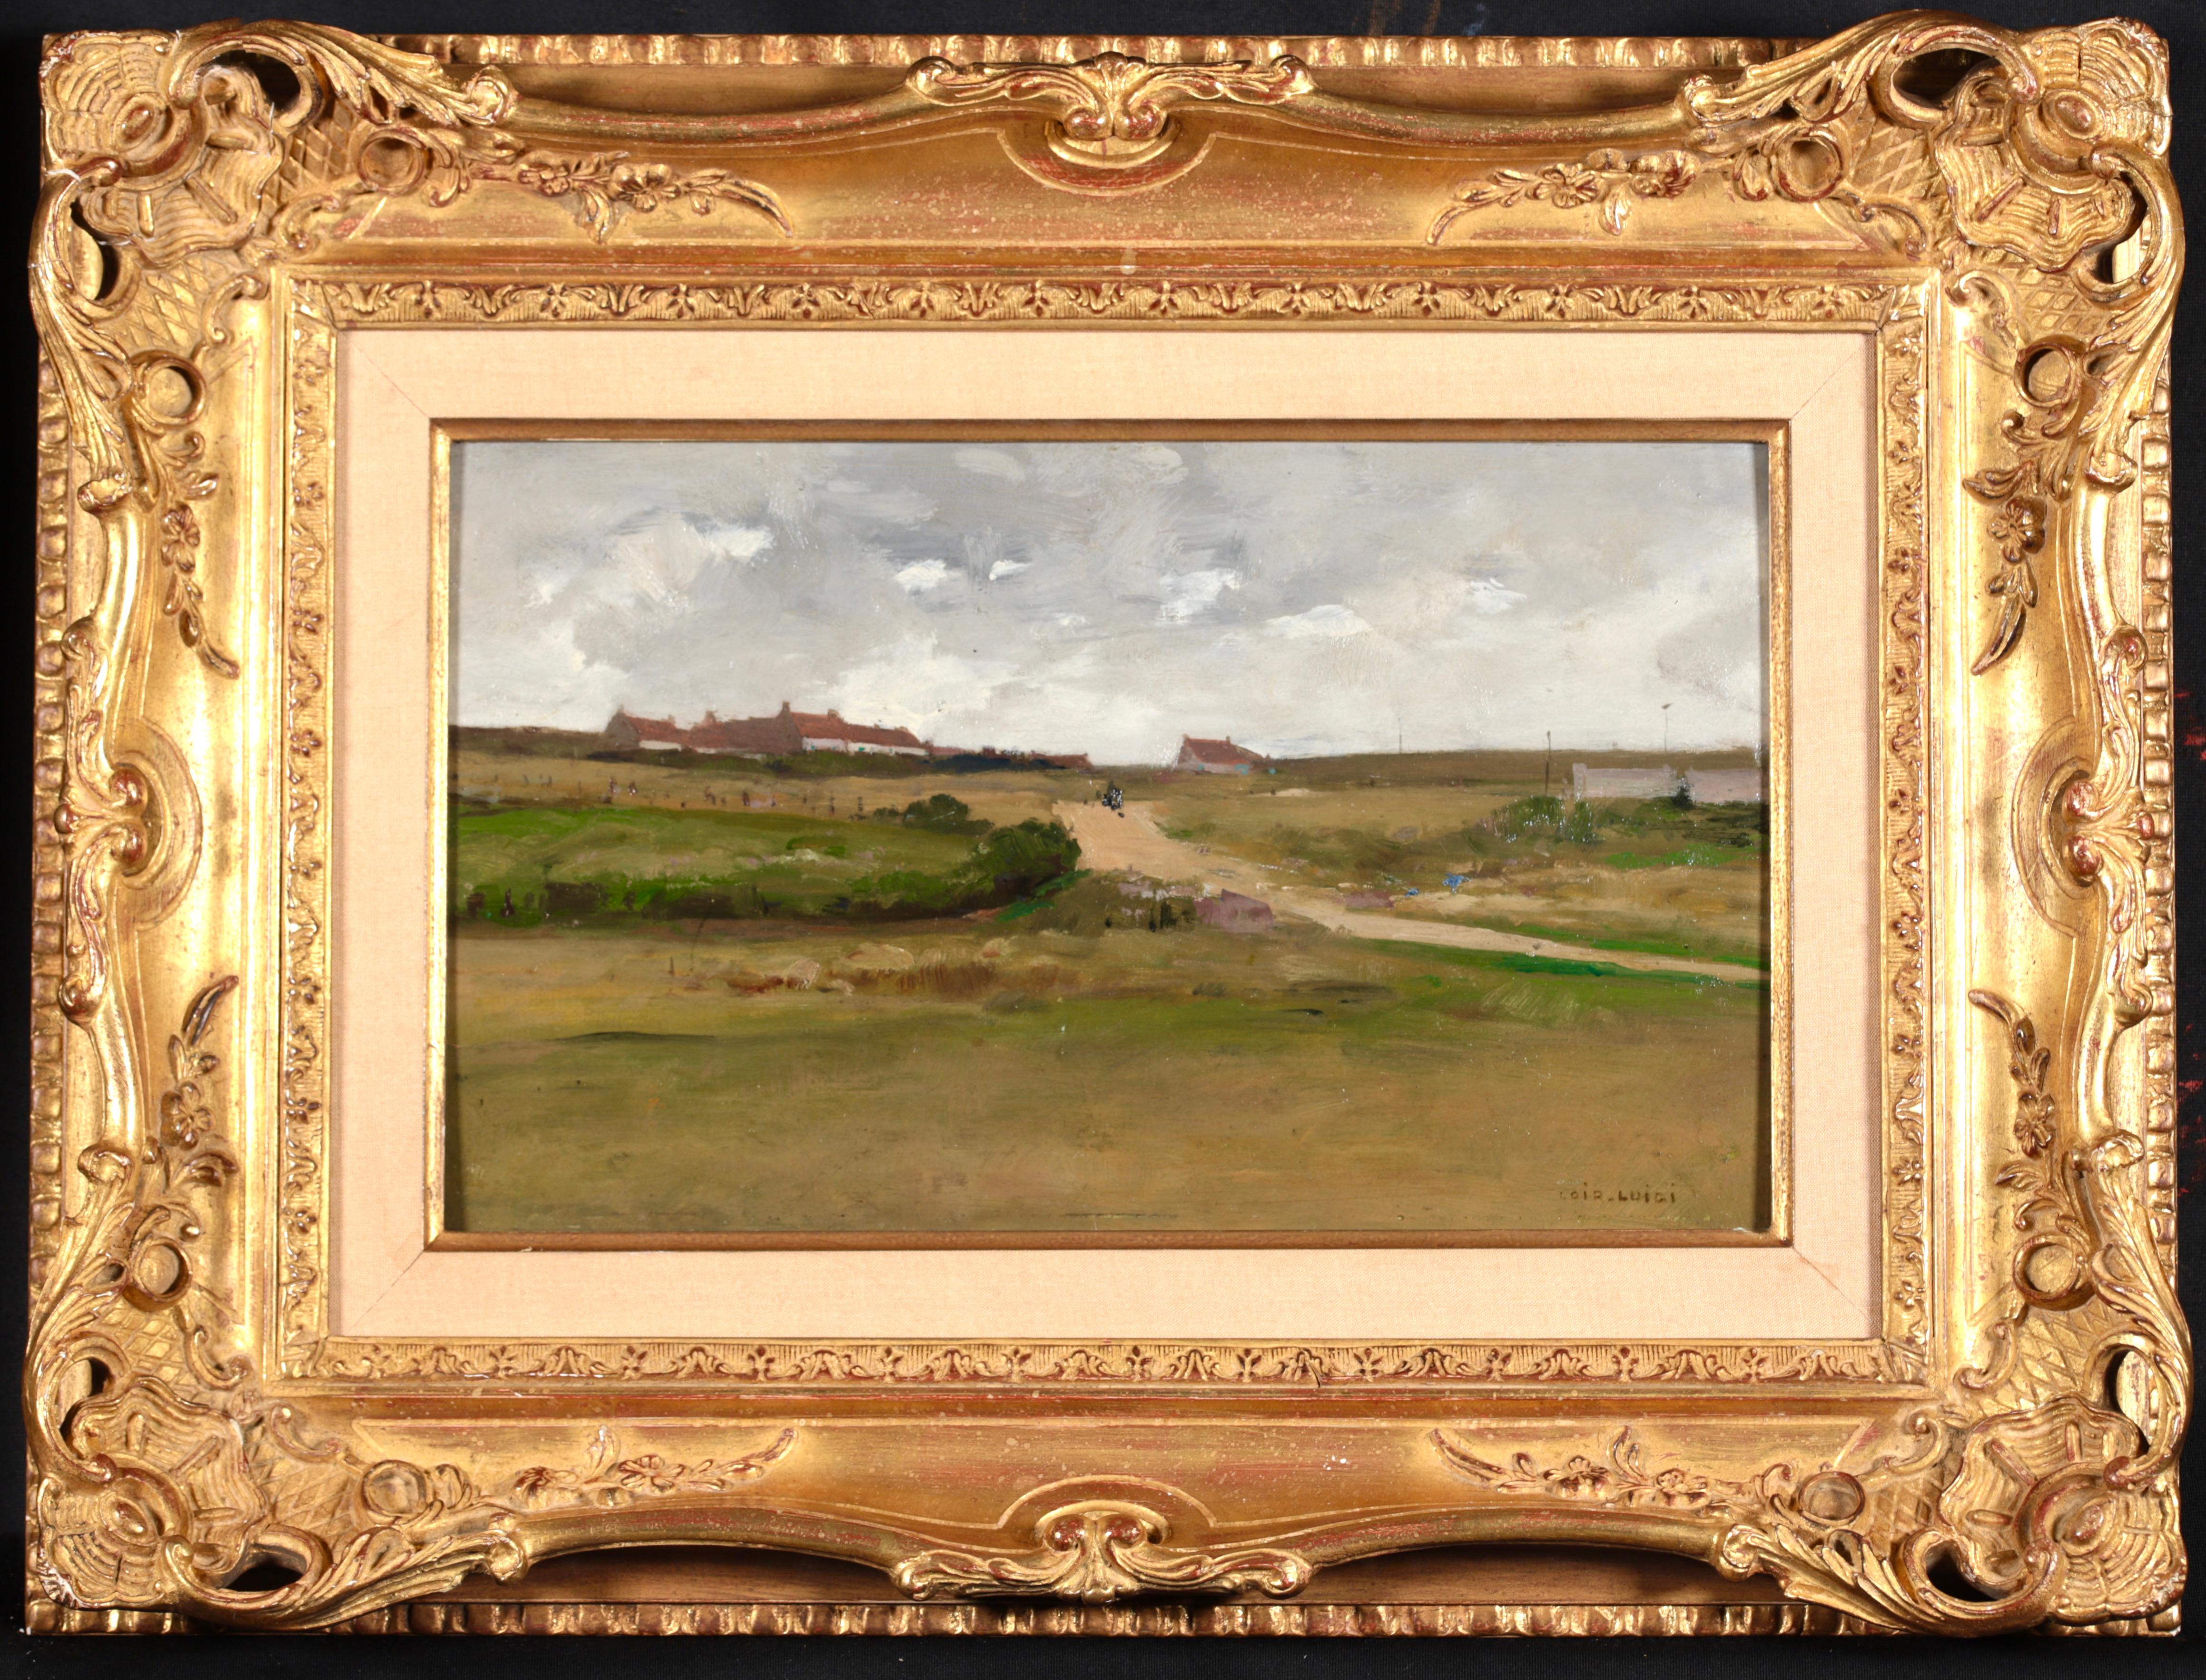 Signed impressionist landscape oil on board circa 1910 by French painter Luigi Loir. The work depicts a view of Cayeux-Sur-Mer, a resort in northern France. A path runs through a rural landscape leading up to the buildings of the outskirts of the